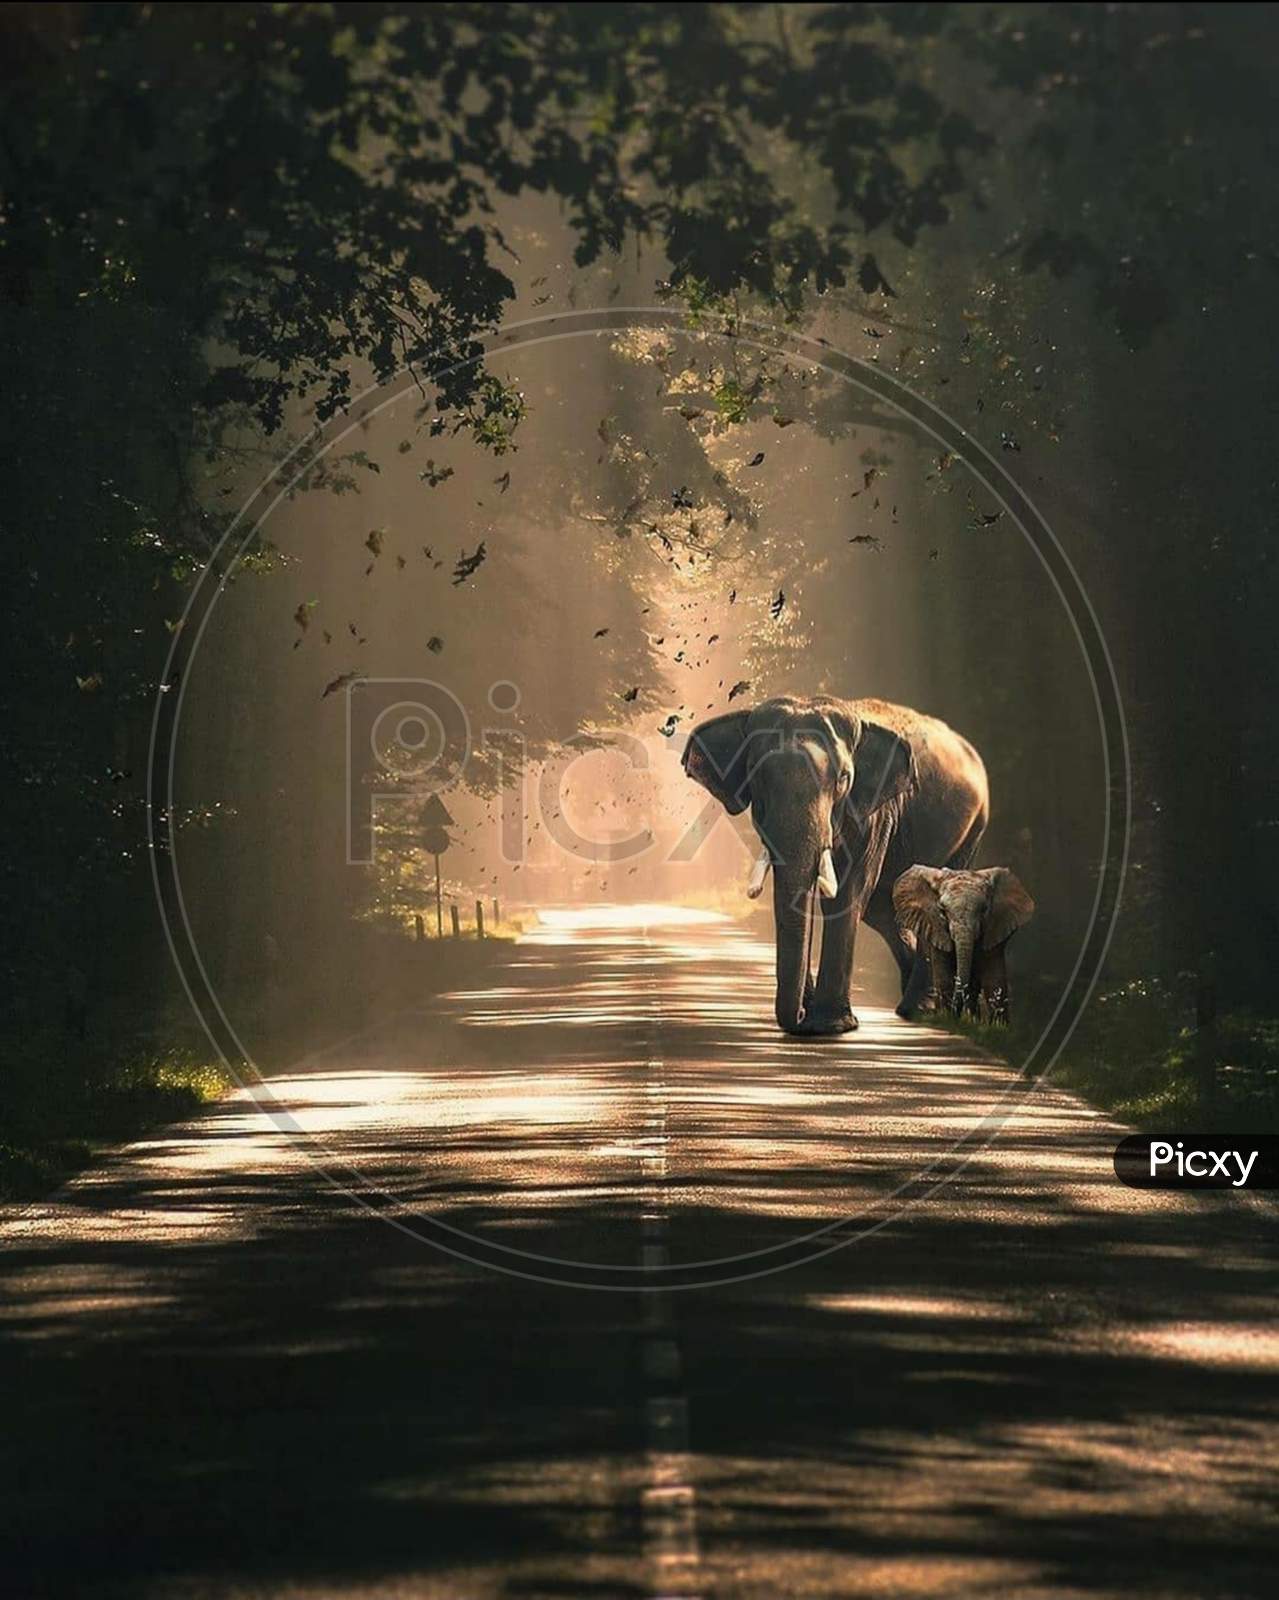 A baby elephant is walking with his Mother or Father in the middle of the road